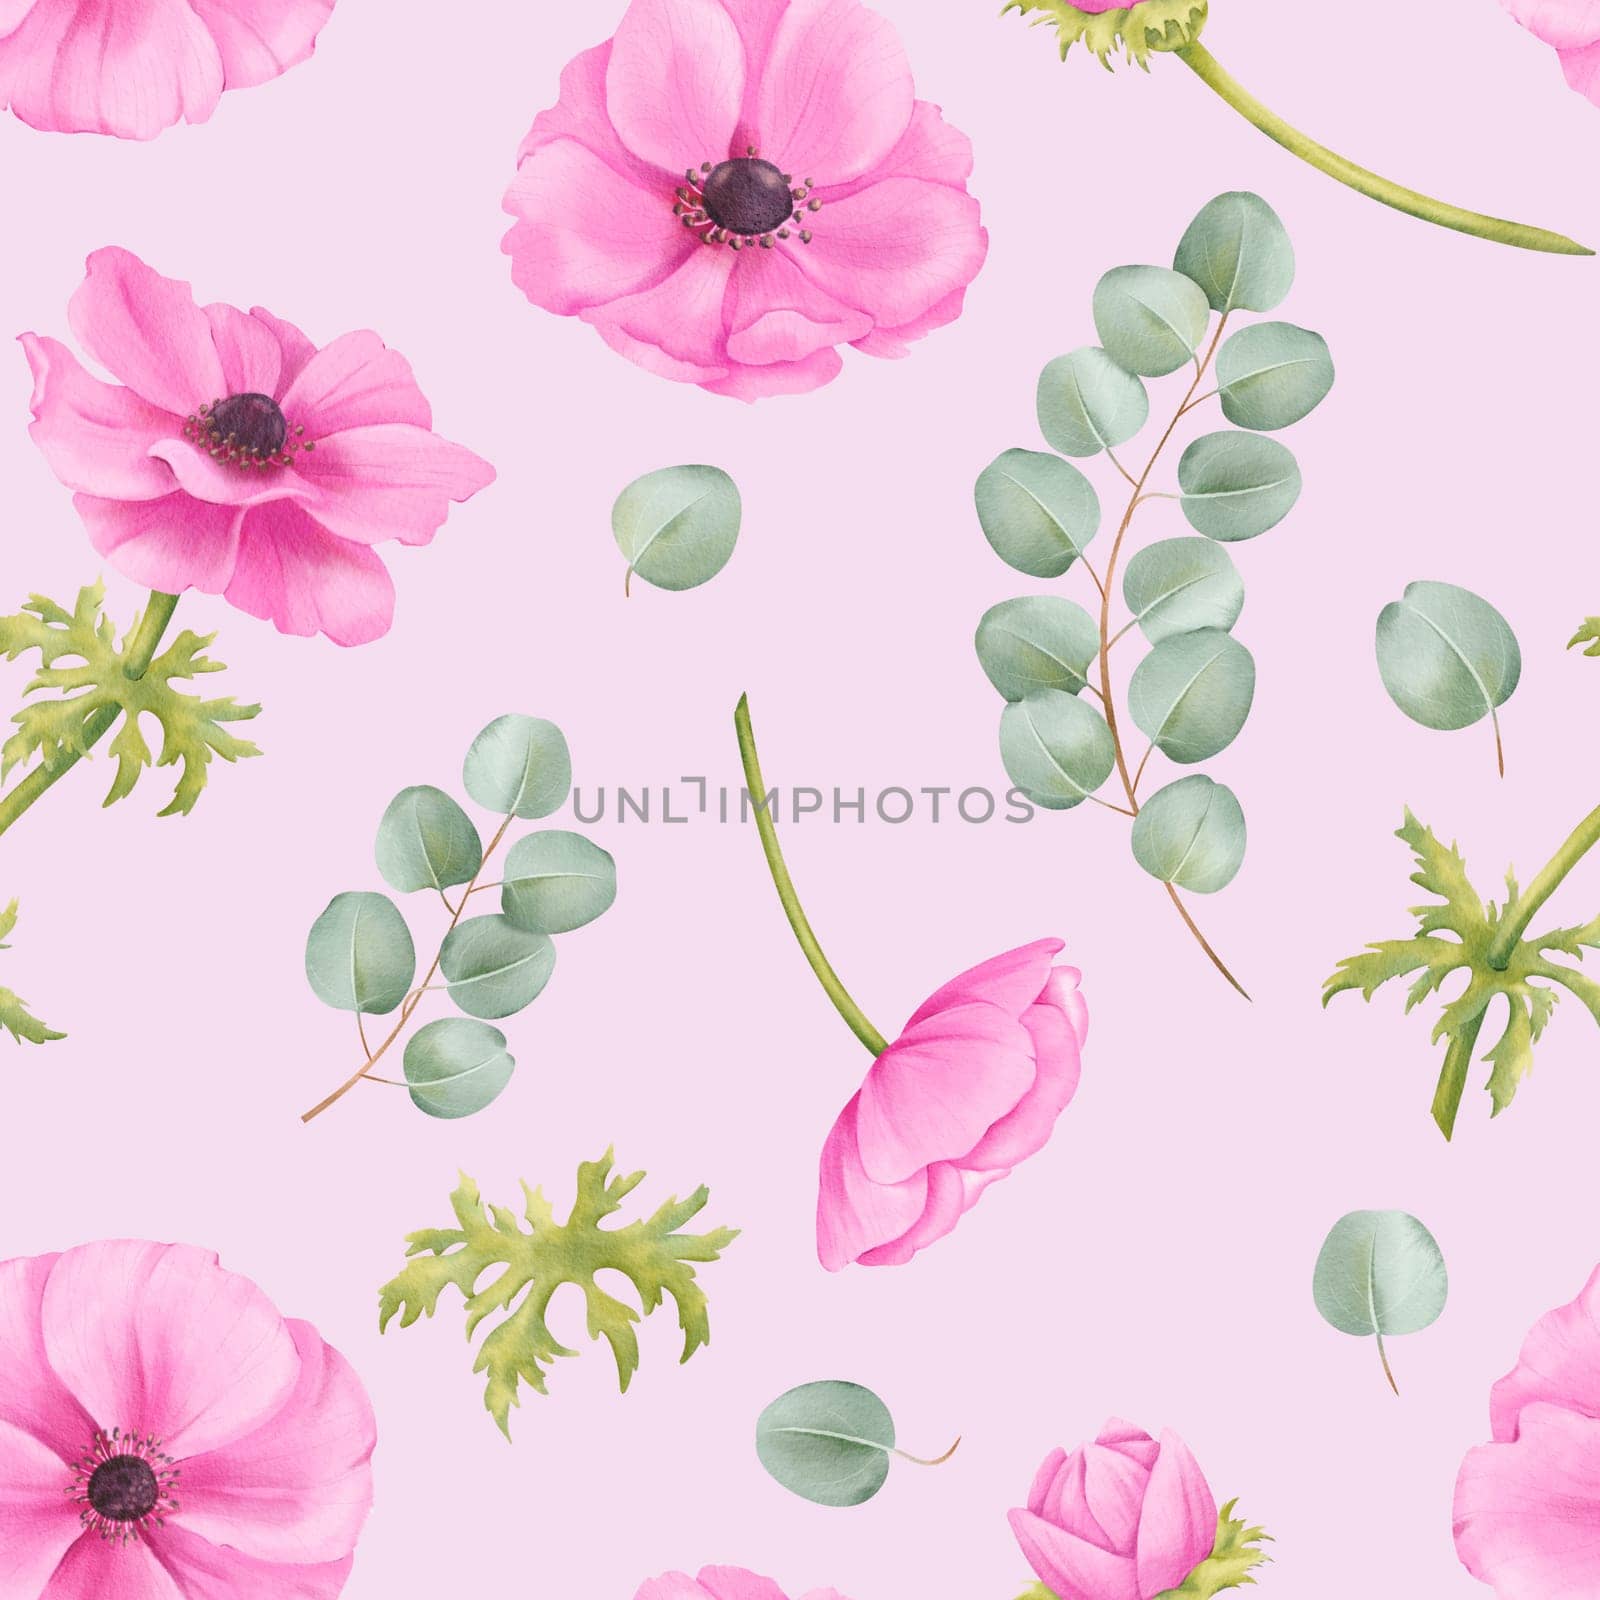 Seamless pattern on a pink background. Pink watercolor anemone flowers, greenery, eucalyptus leaves. Perfect for wallpapers, textiles, stationery, and packaging designs by Art_Mari_Ka